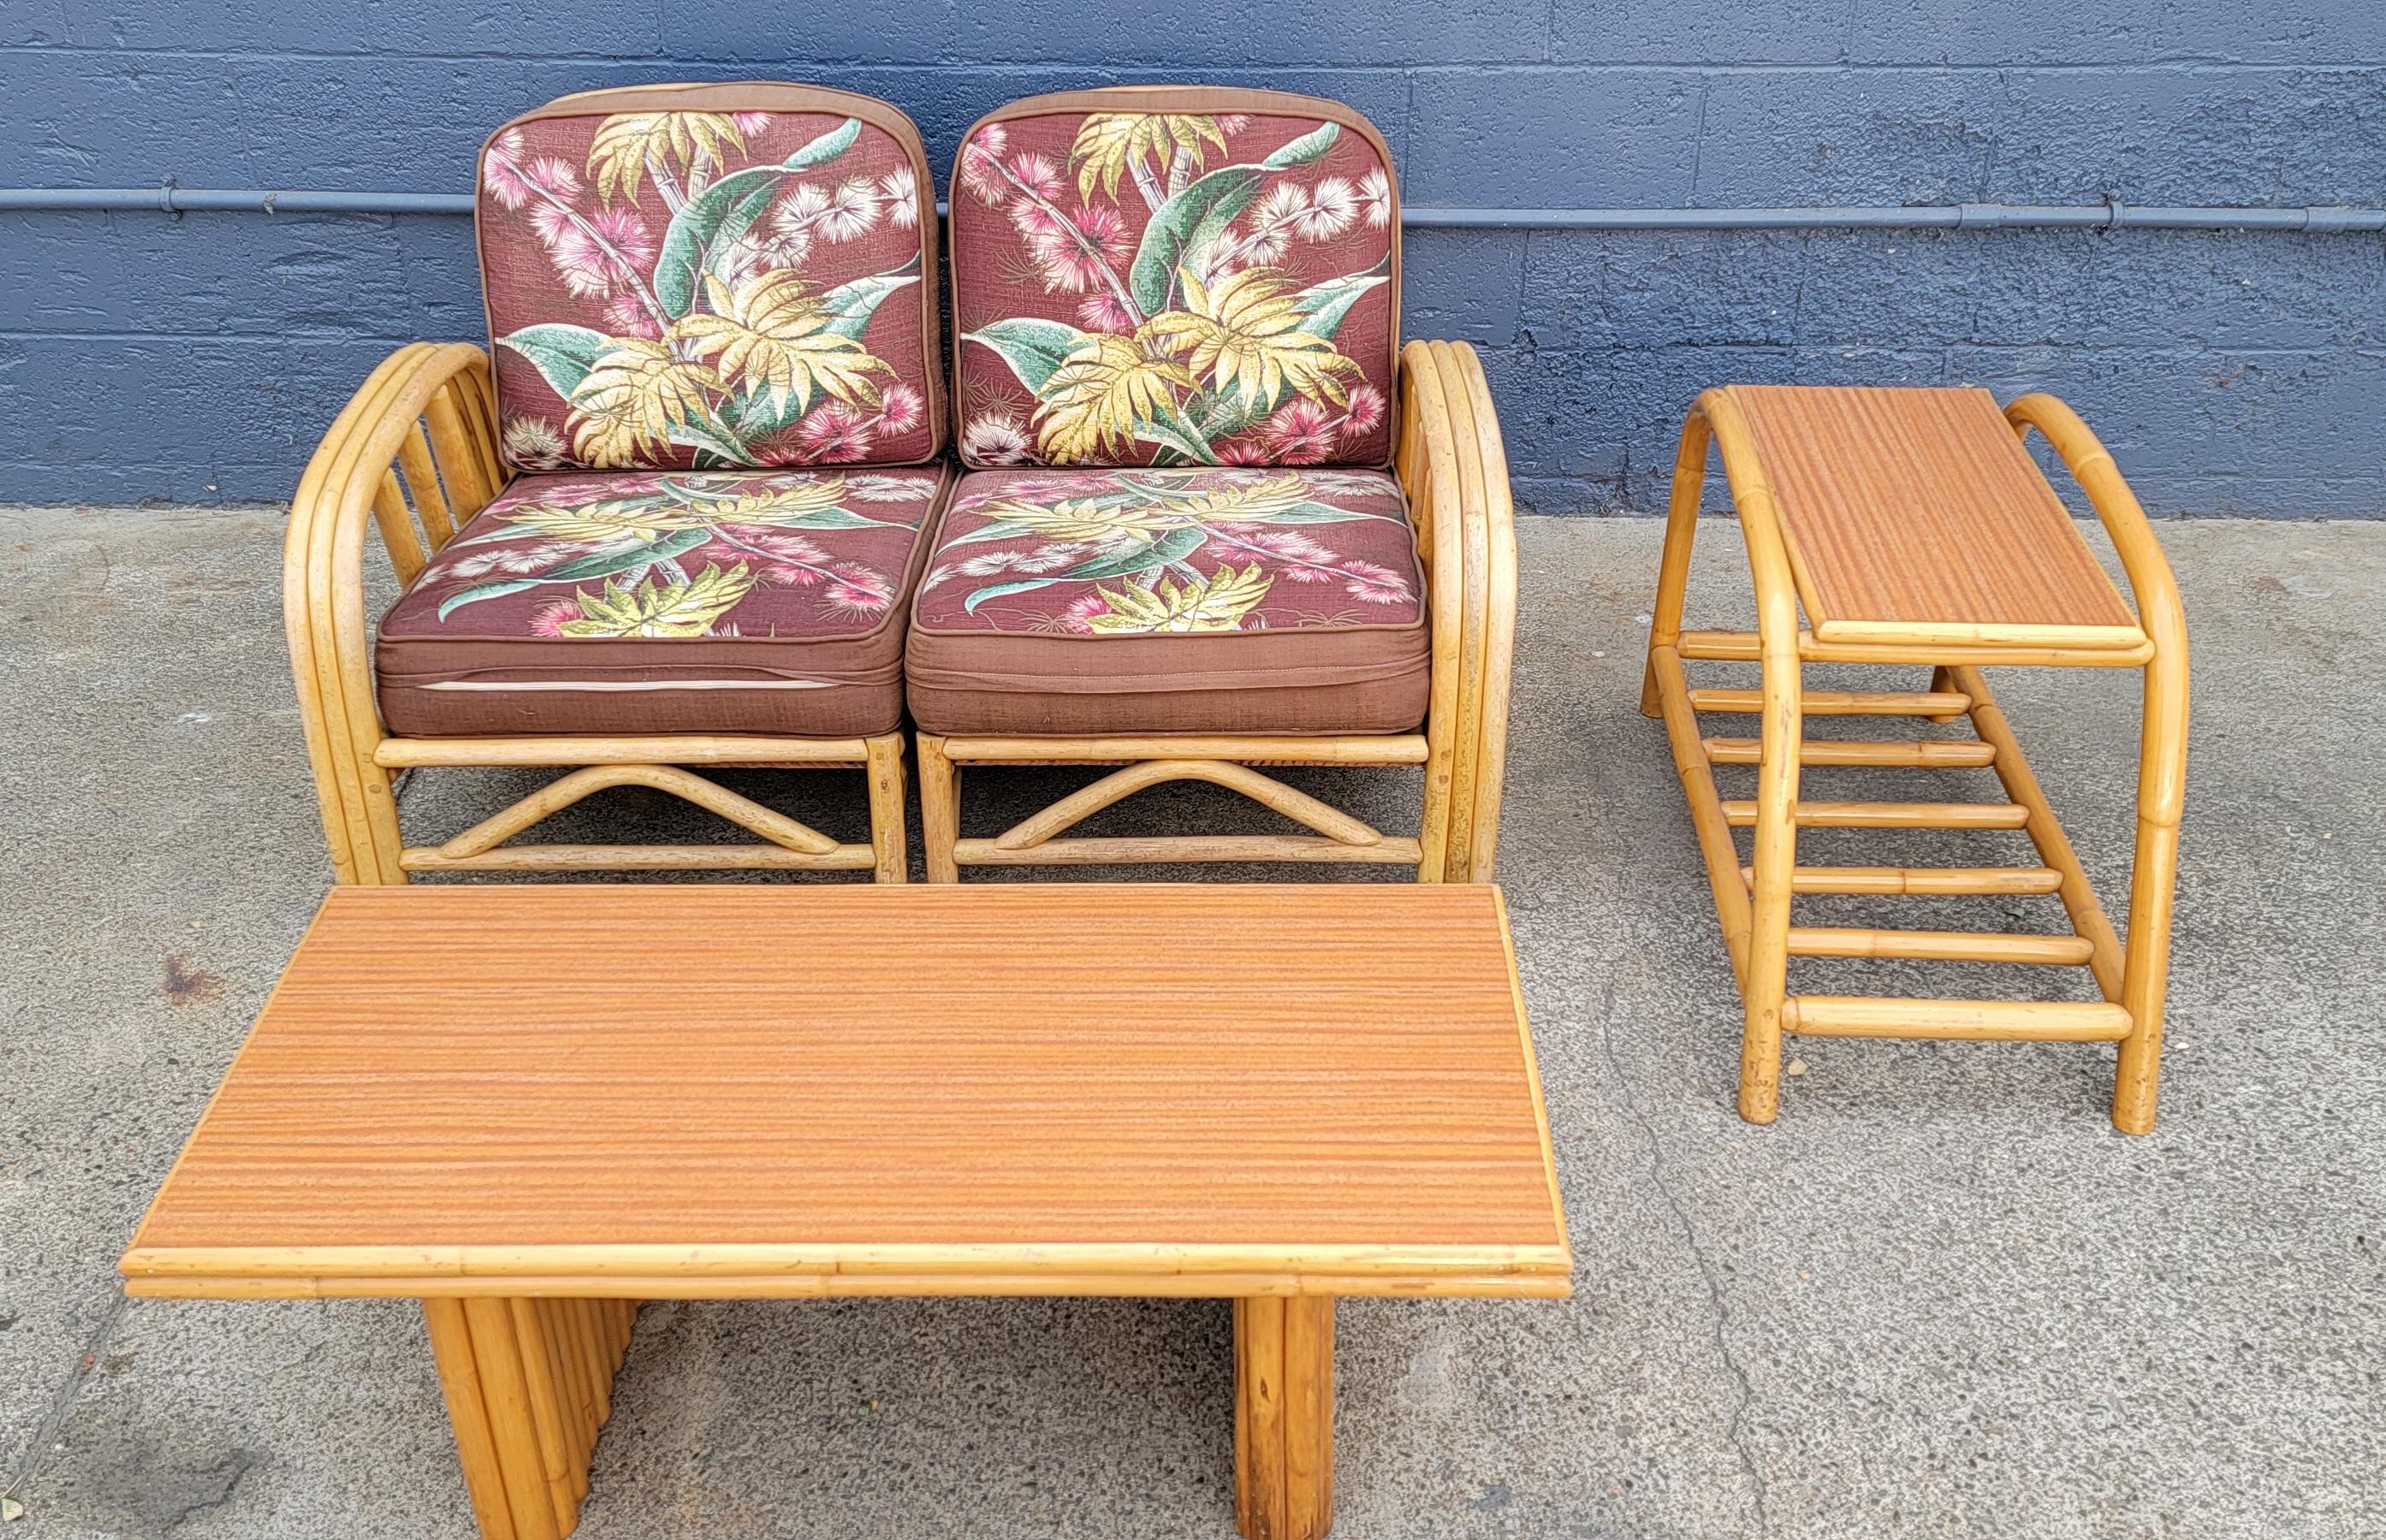 A 1950's bamboo suite consisting of a 2 piece sofa, end table and coffee table. Faux wood Formica tops on tables offer a very durable surface. Made of steamed bamboo, notice no bindings in construction, nothing to unravel. Two tier end or side